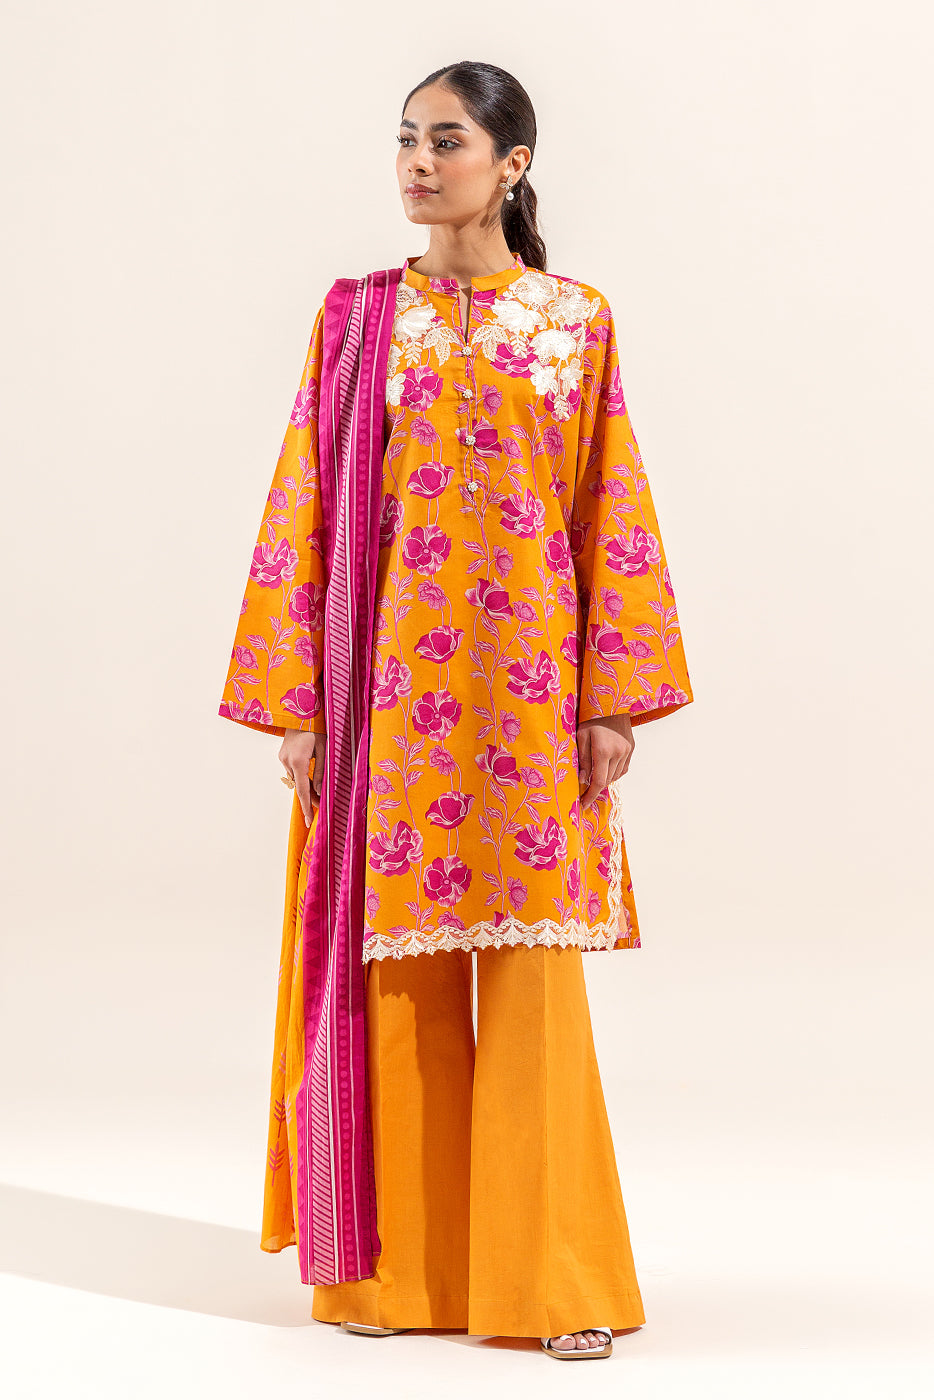 2 PIECE EMBROIDERED LAWN SUIT-AUTUMN GLORY (UNSTITCHED)